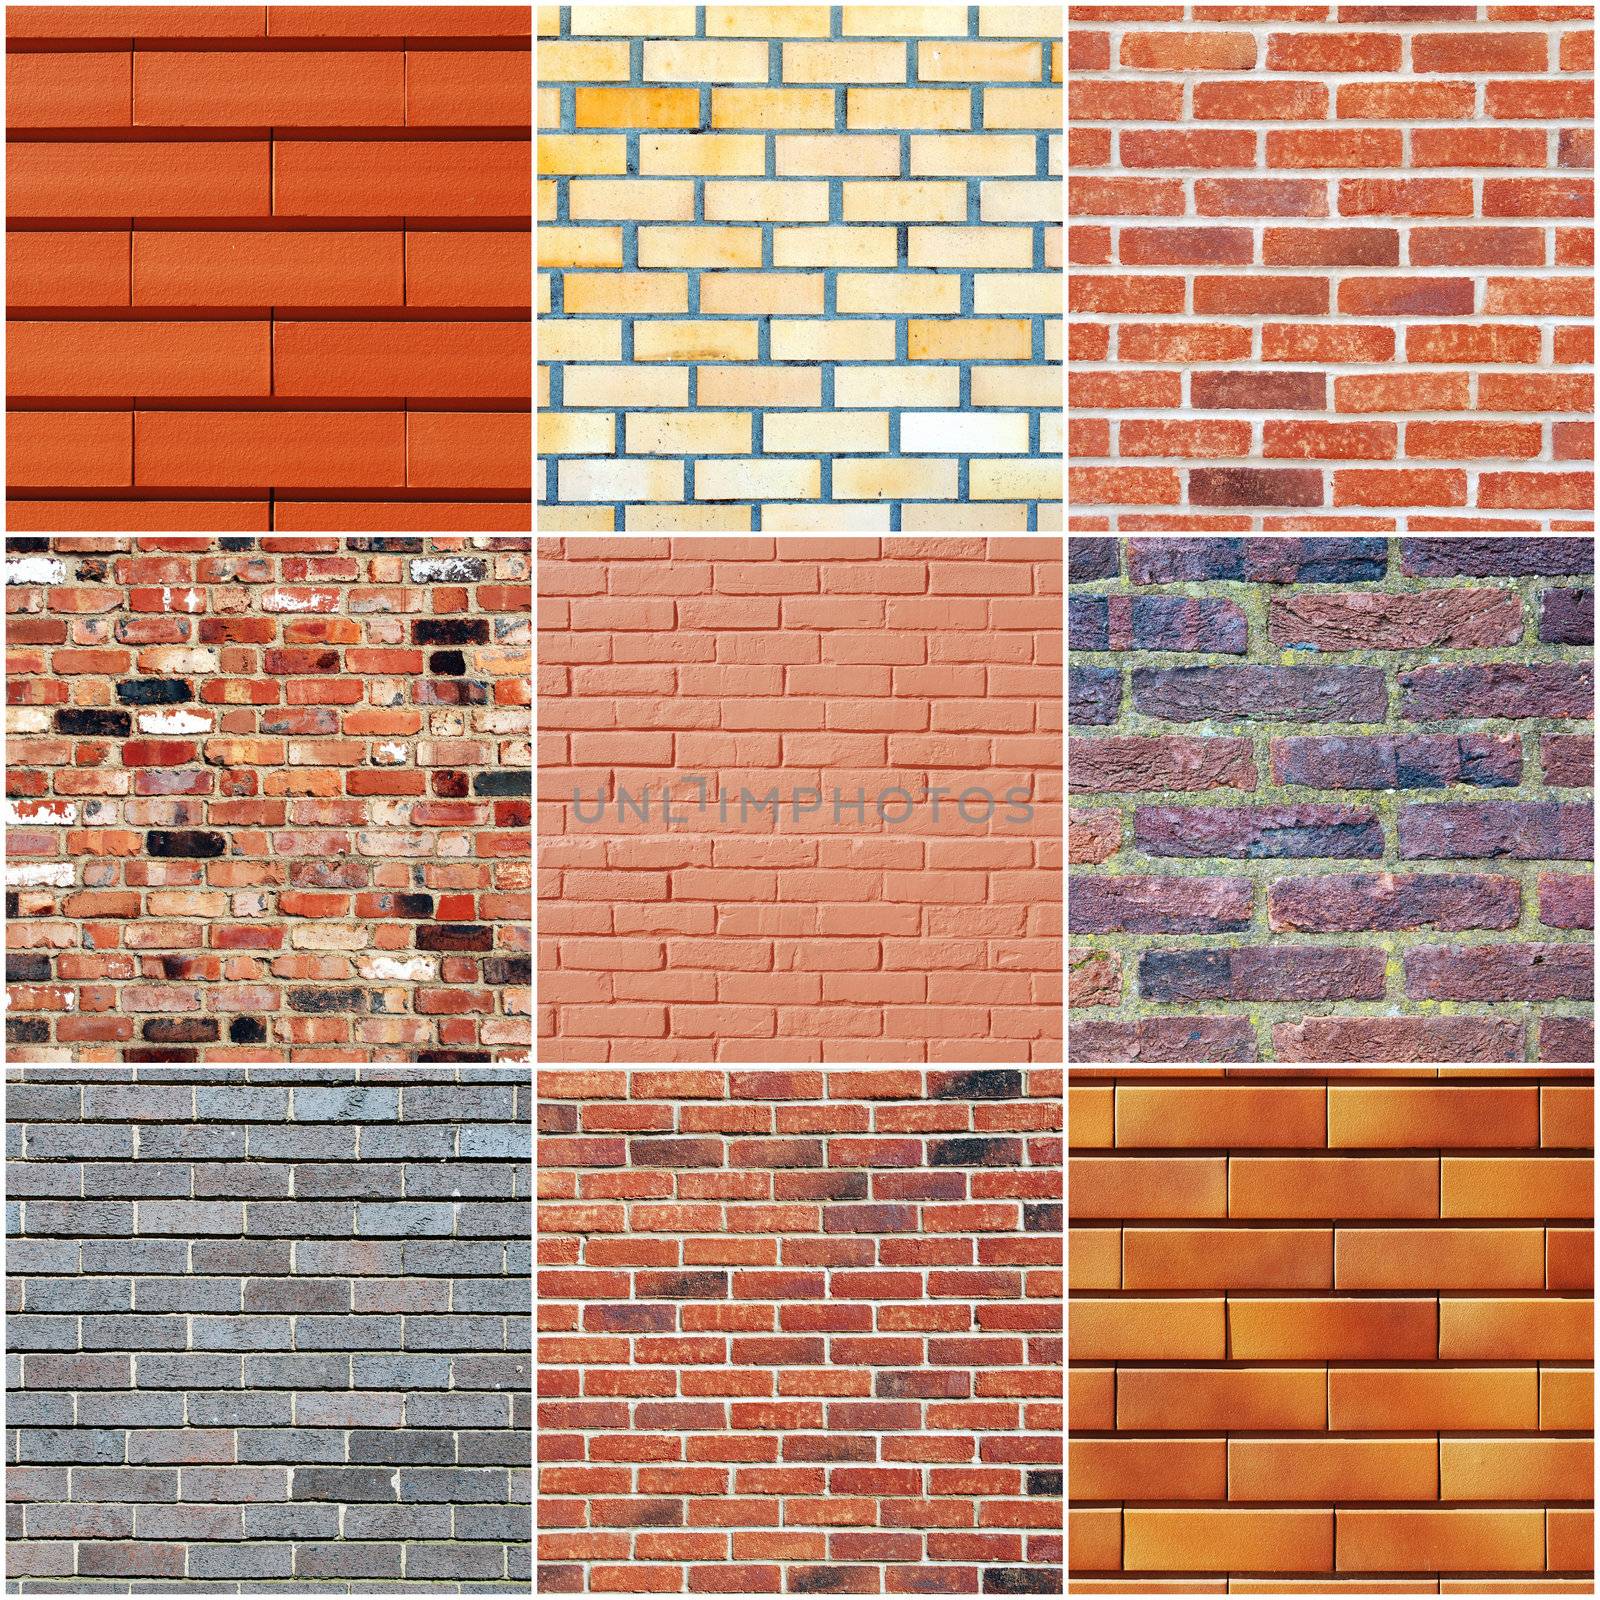 Brick wall textures by luissantos84